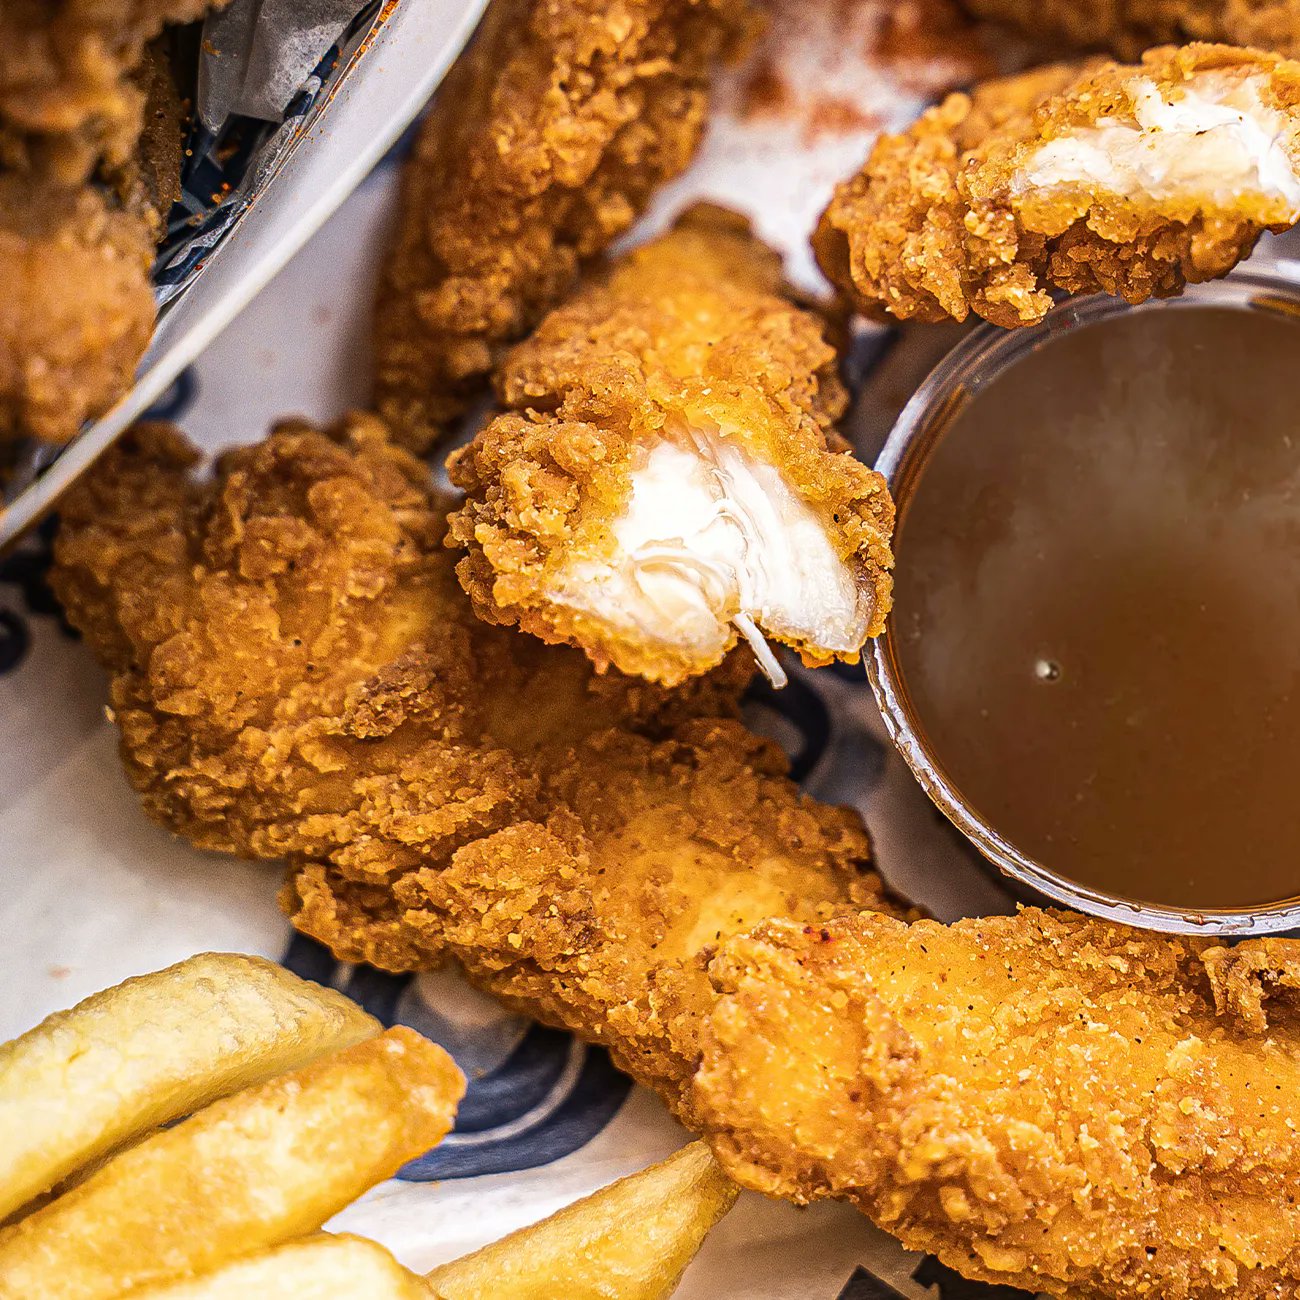 Chicken tenders for the win!